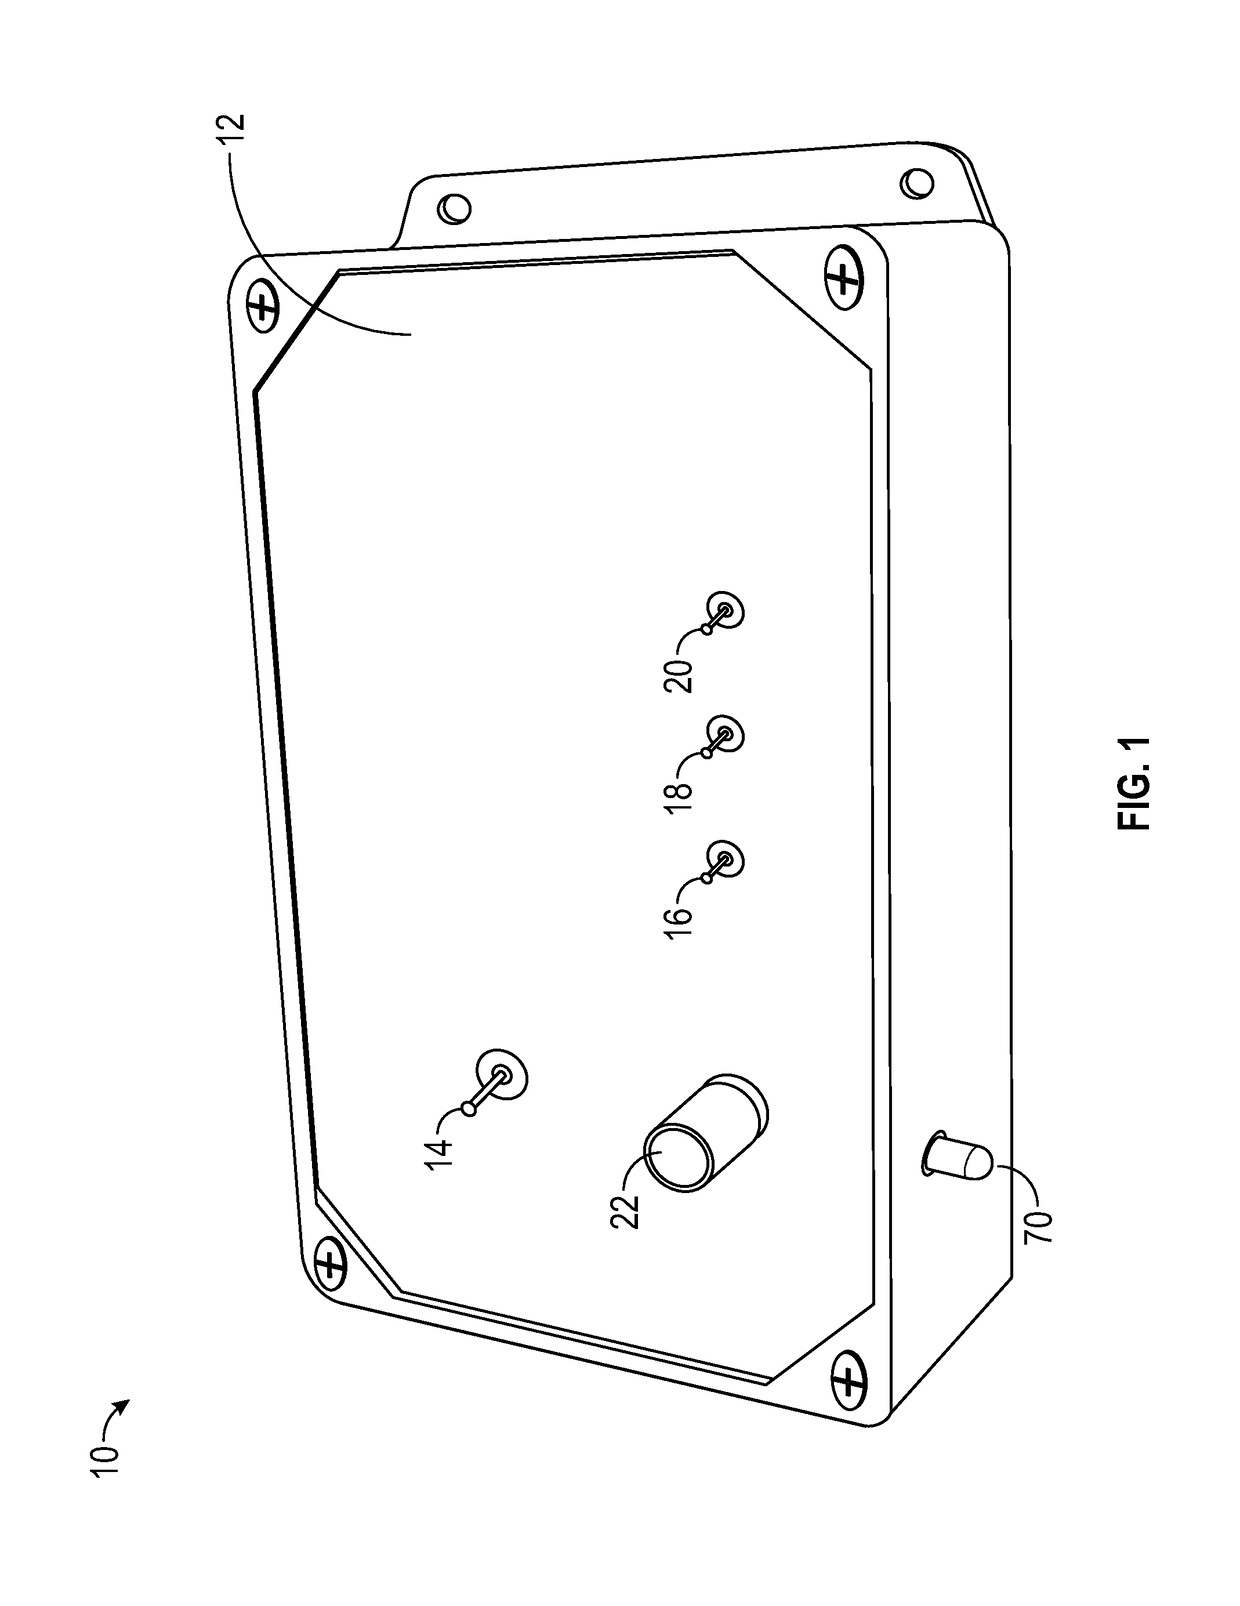 System, method and apparatus for detecting stray voltages